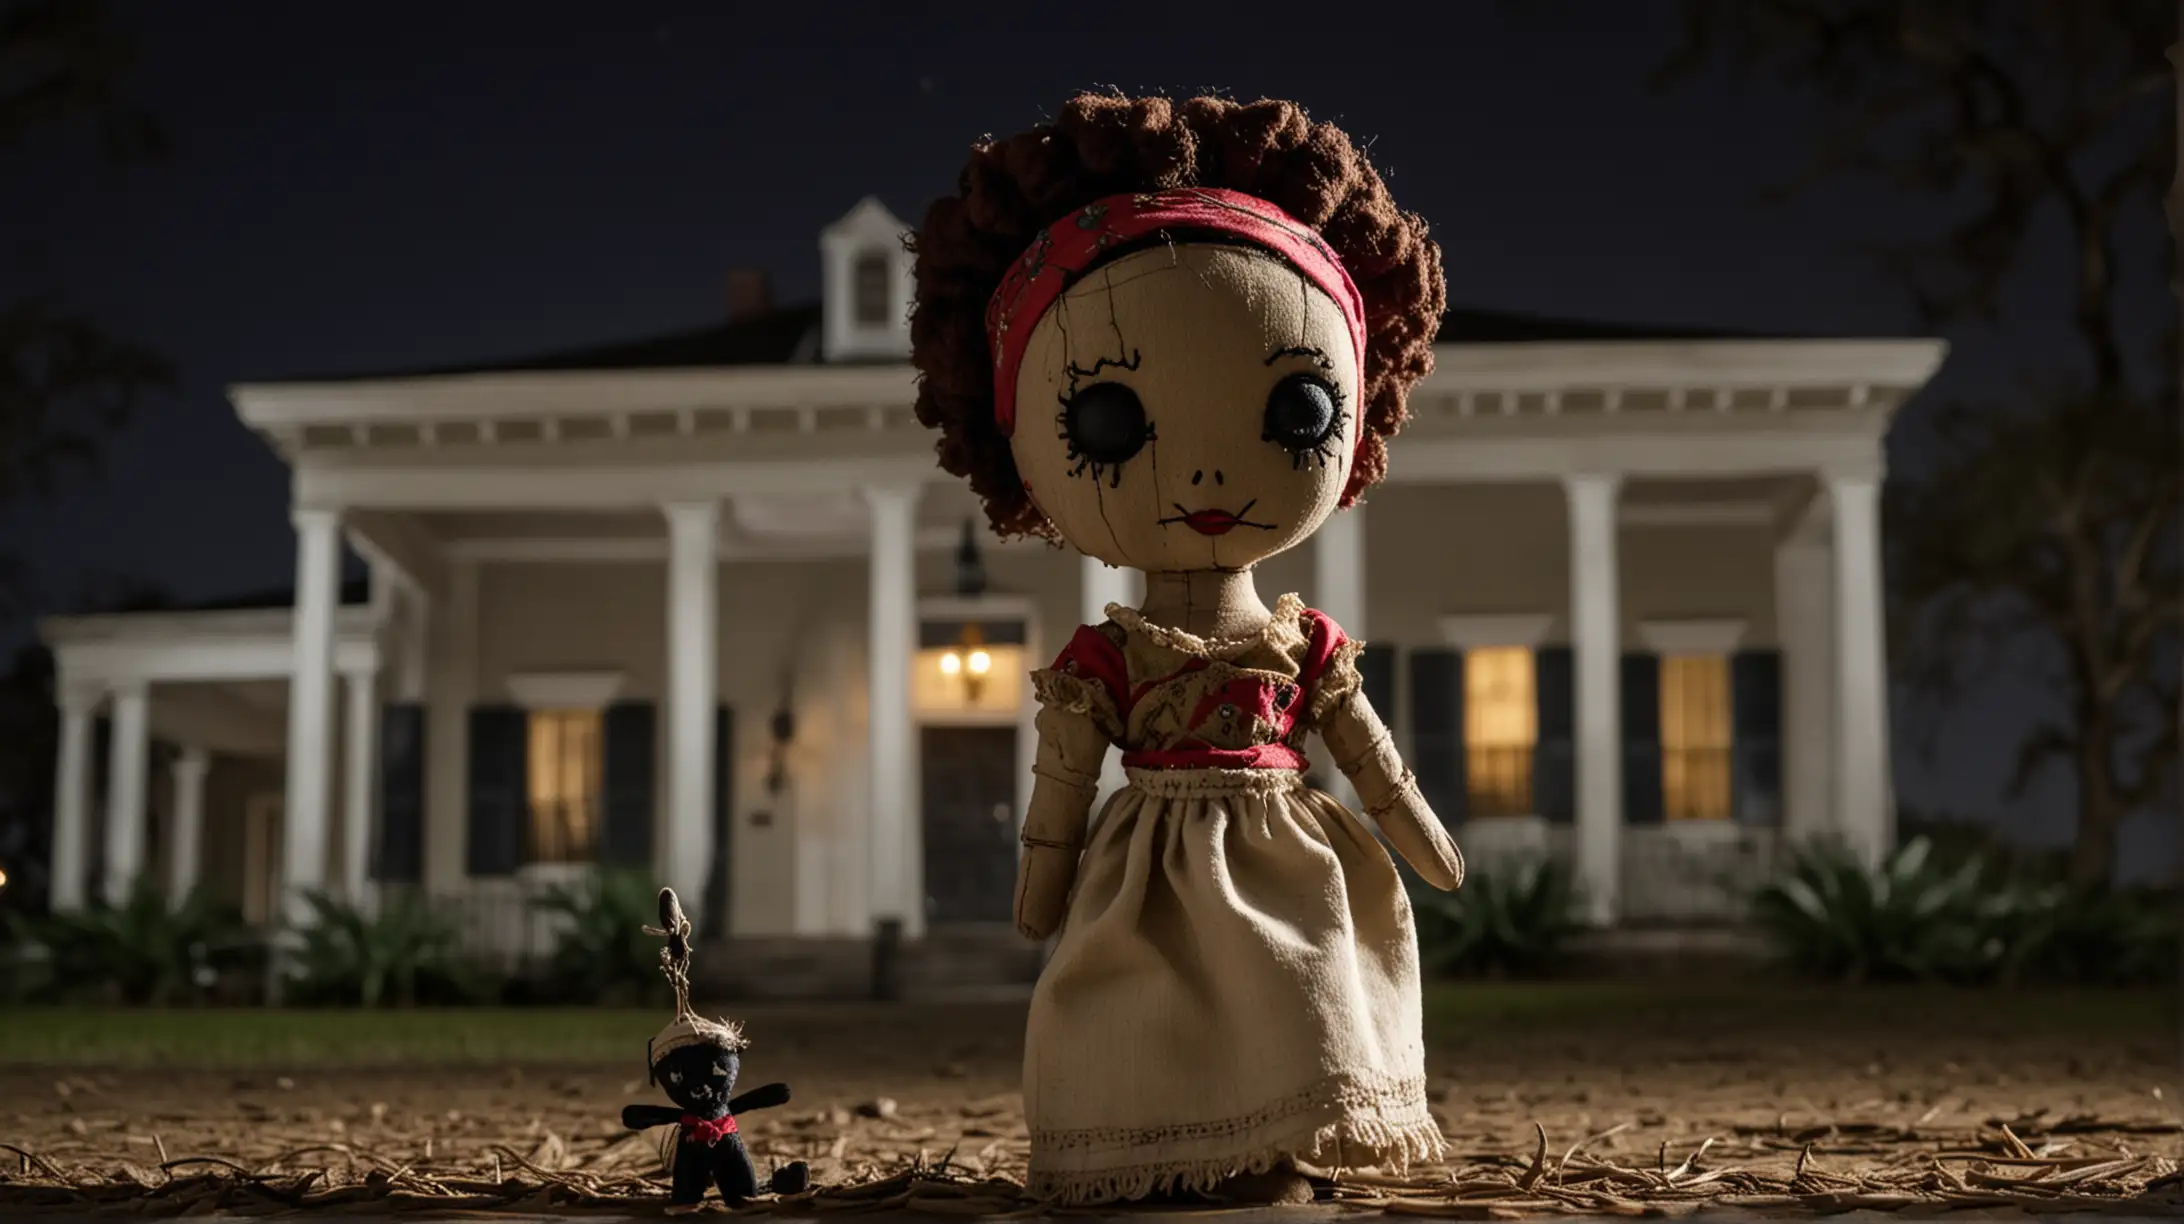 Voodoo Doll Resembling Marie Laveau by Louisiana Plantation Mansion at Night